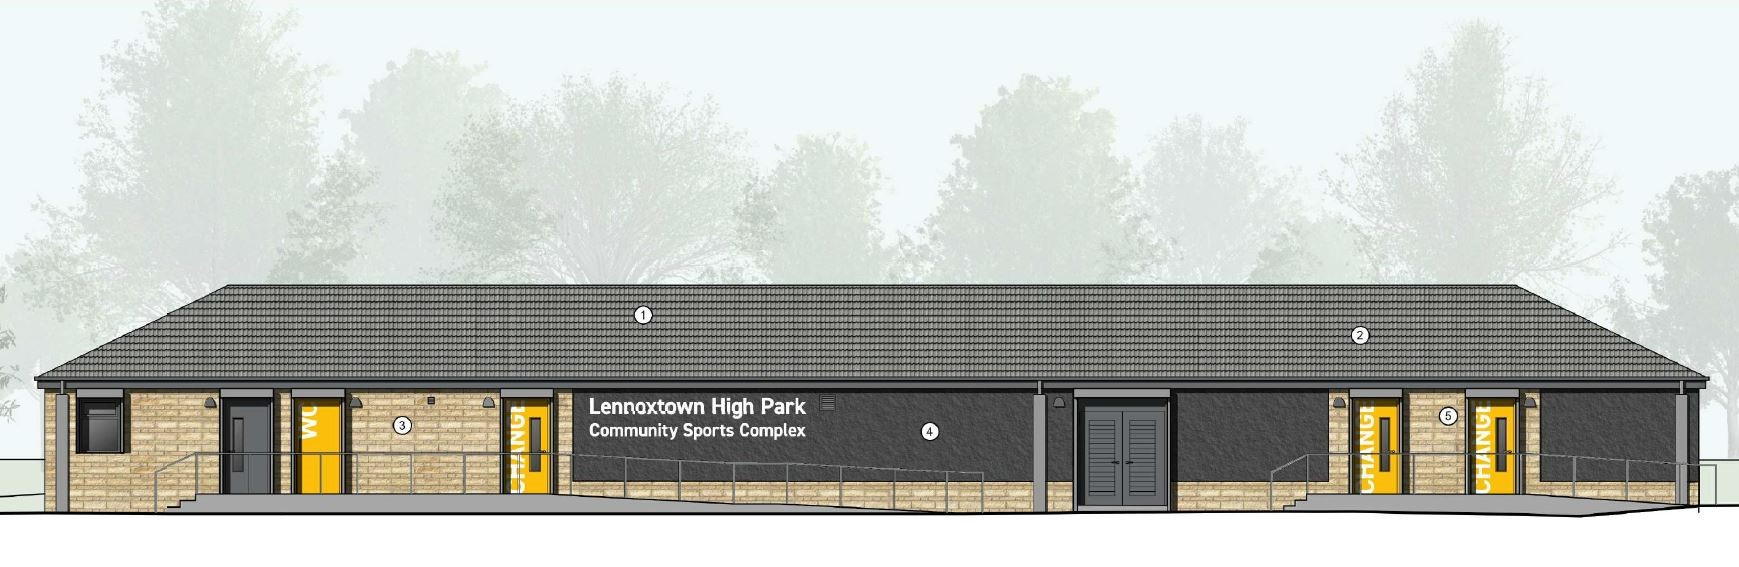 Green light for new £4.3m Lennoxtown sports facility